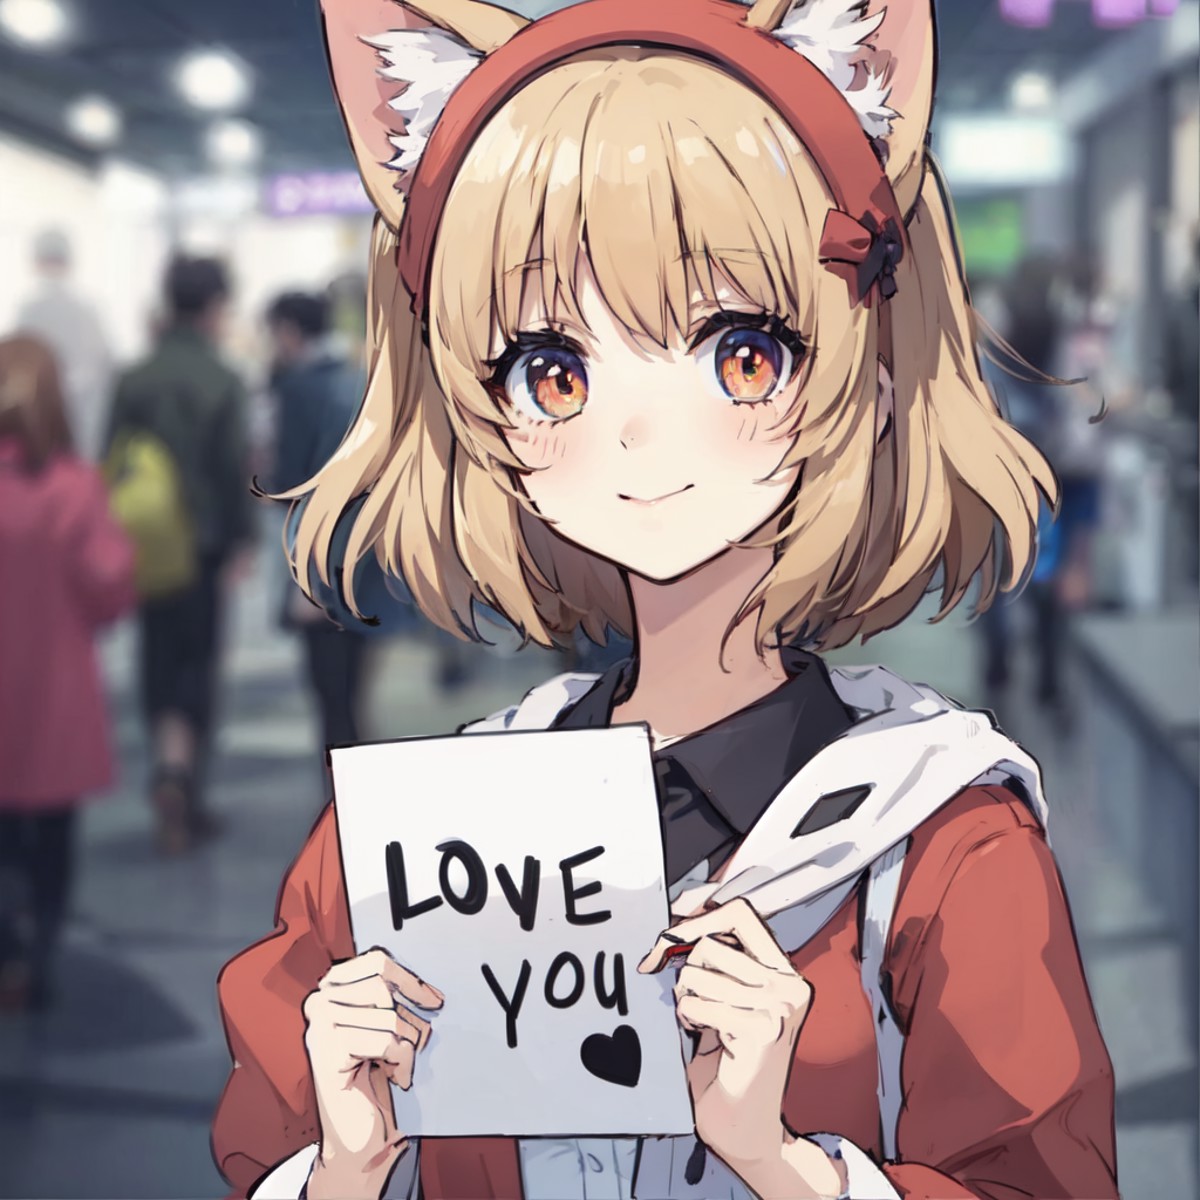 anime, photo of a cute catgirl holding a sign that says "I love you"